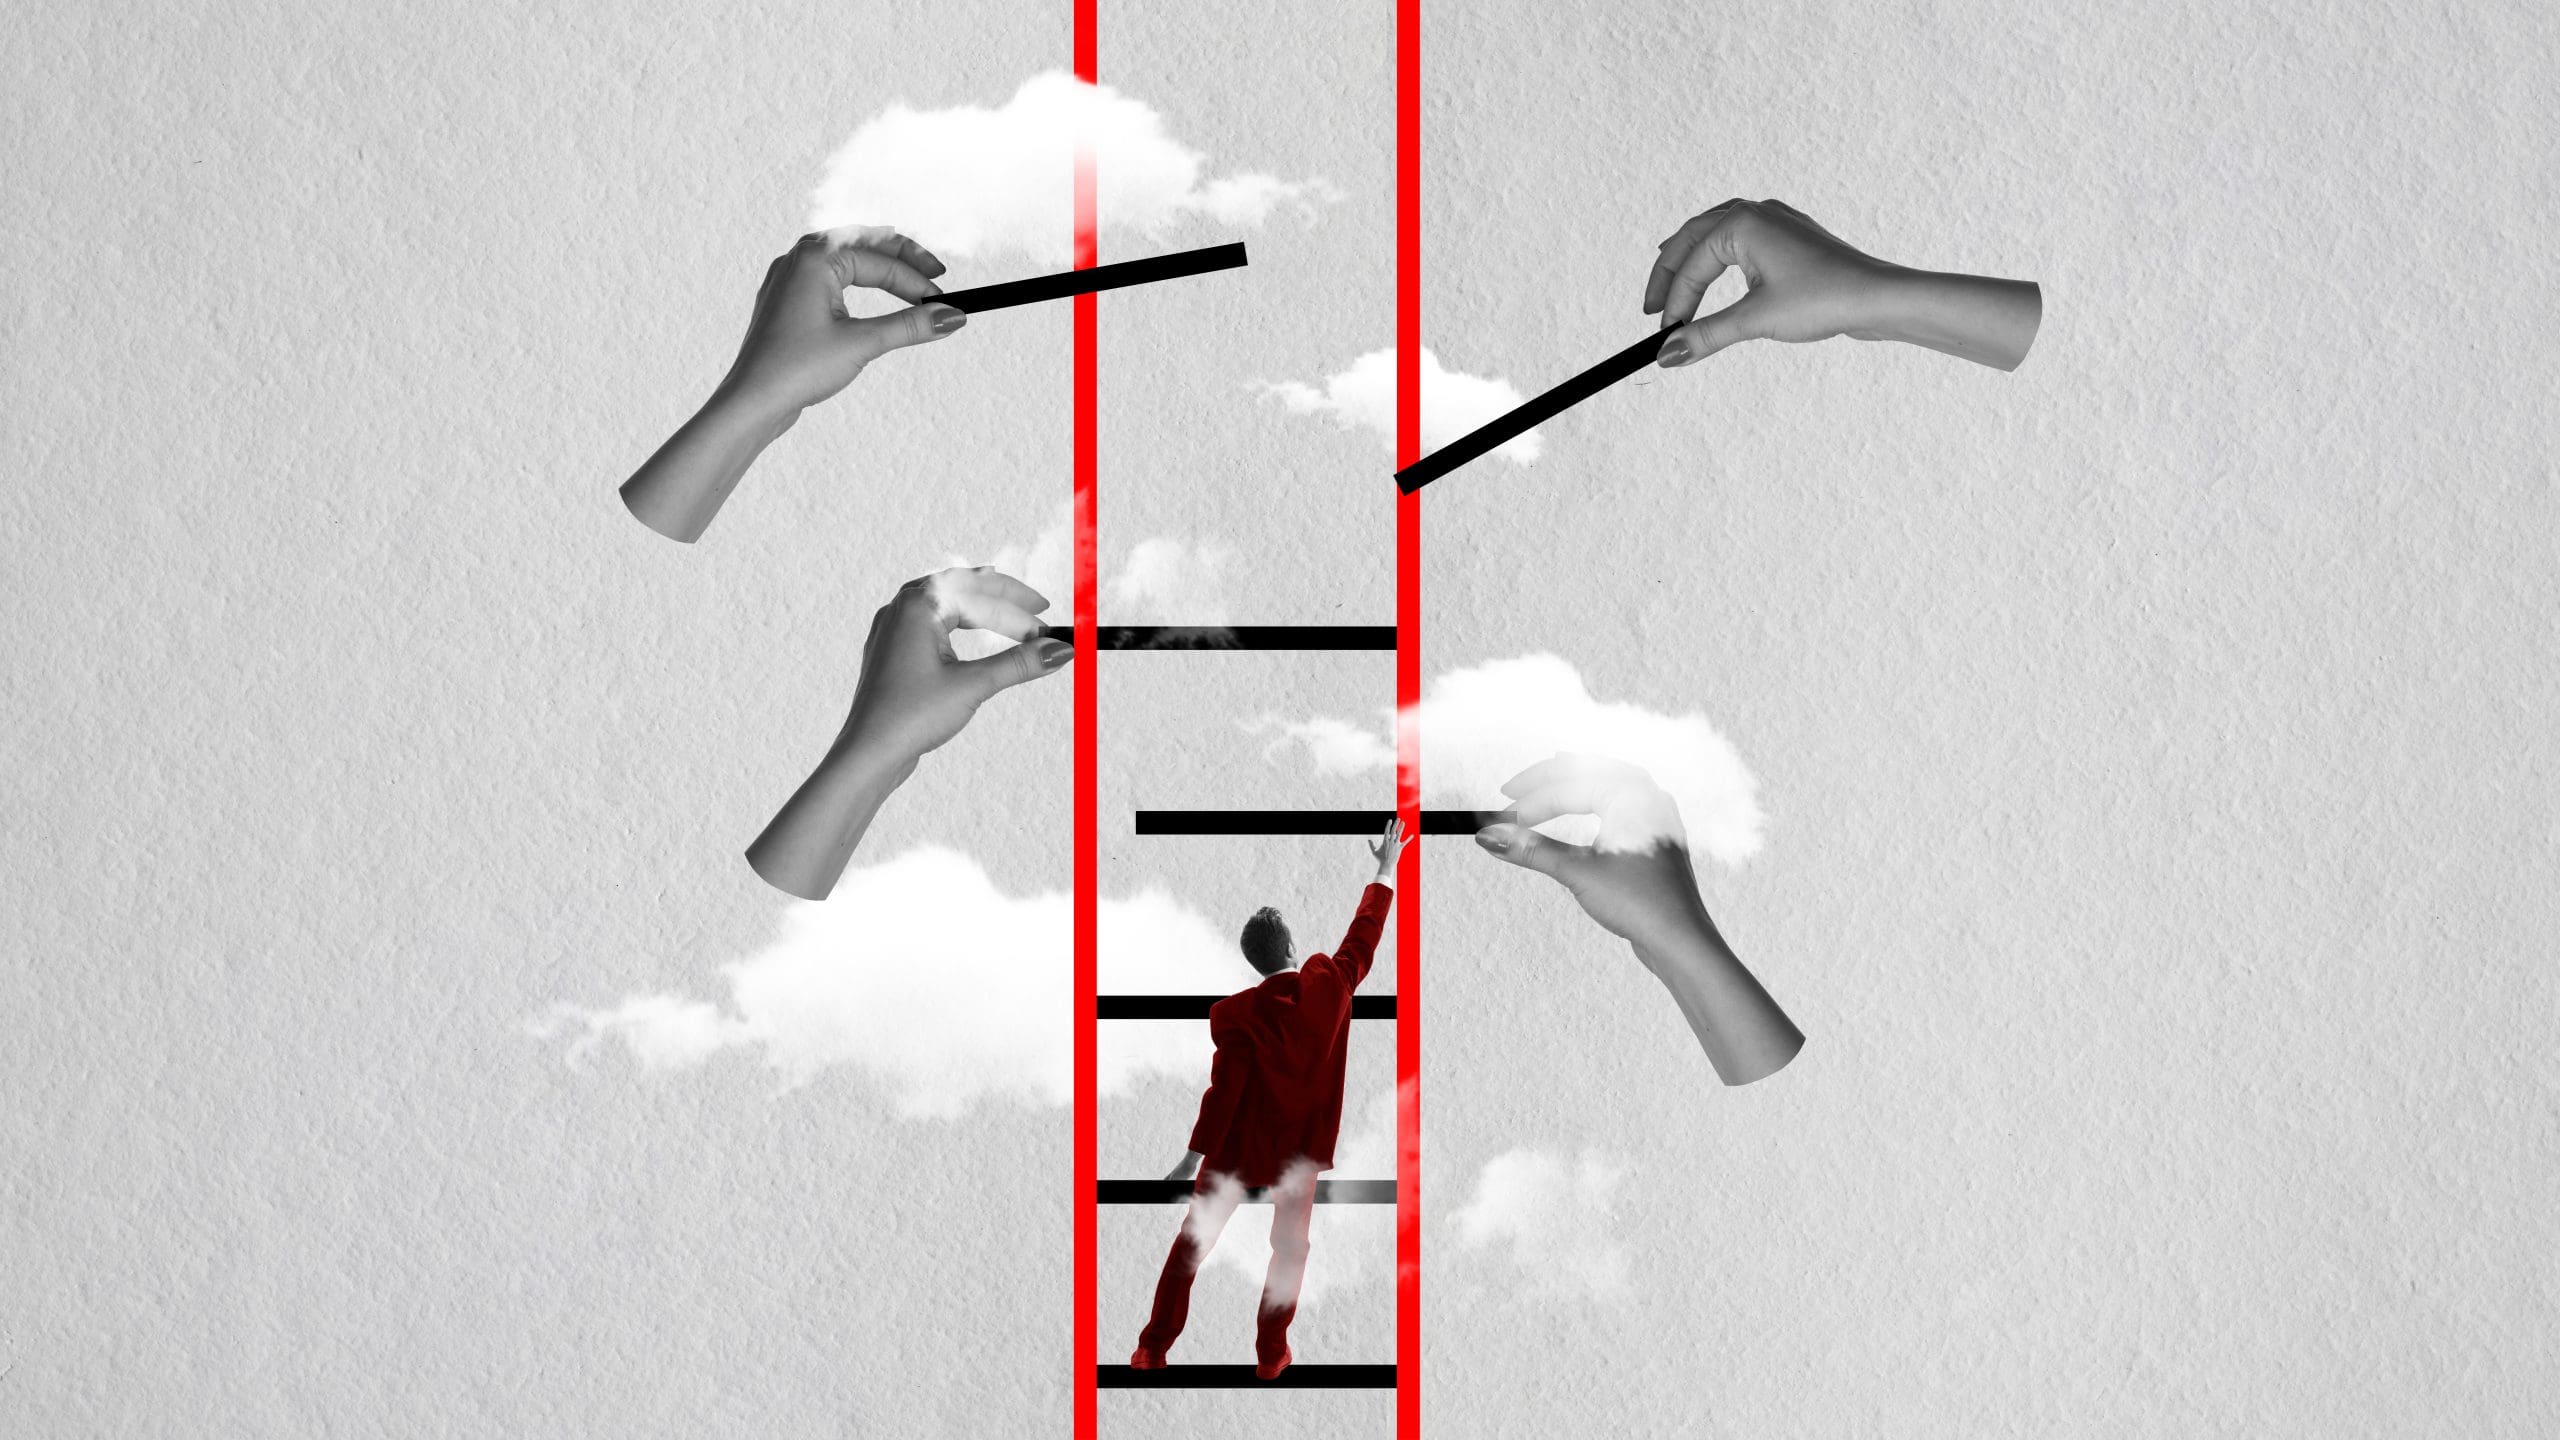 A man is climbing up a ladder to reach the clouds.